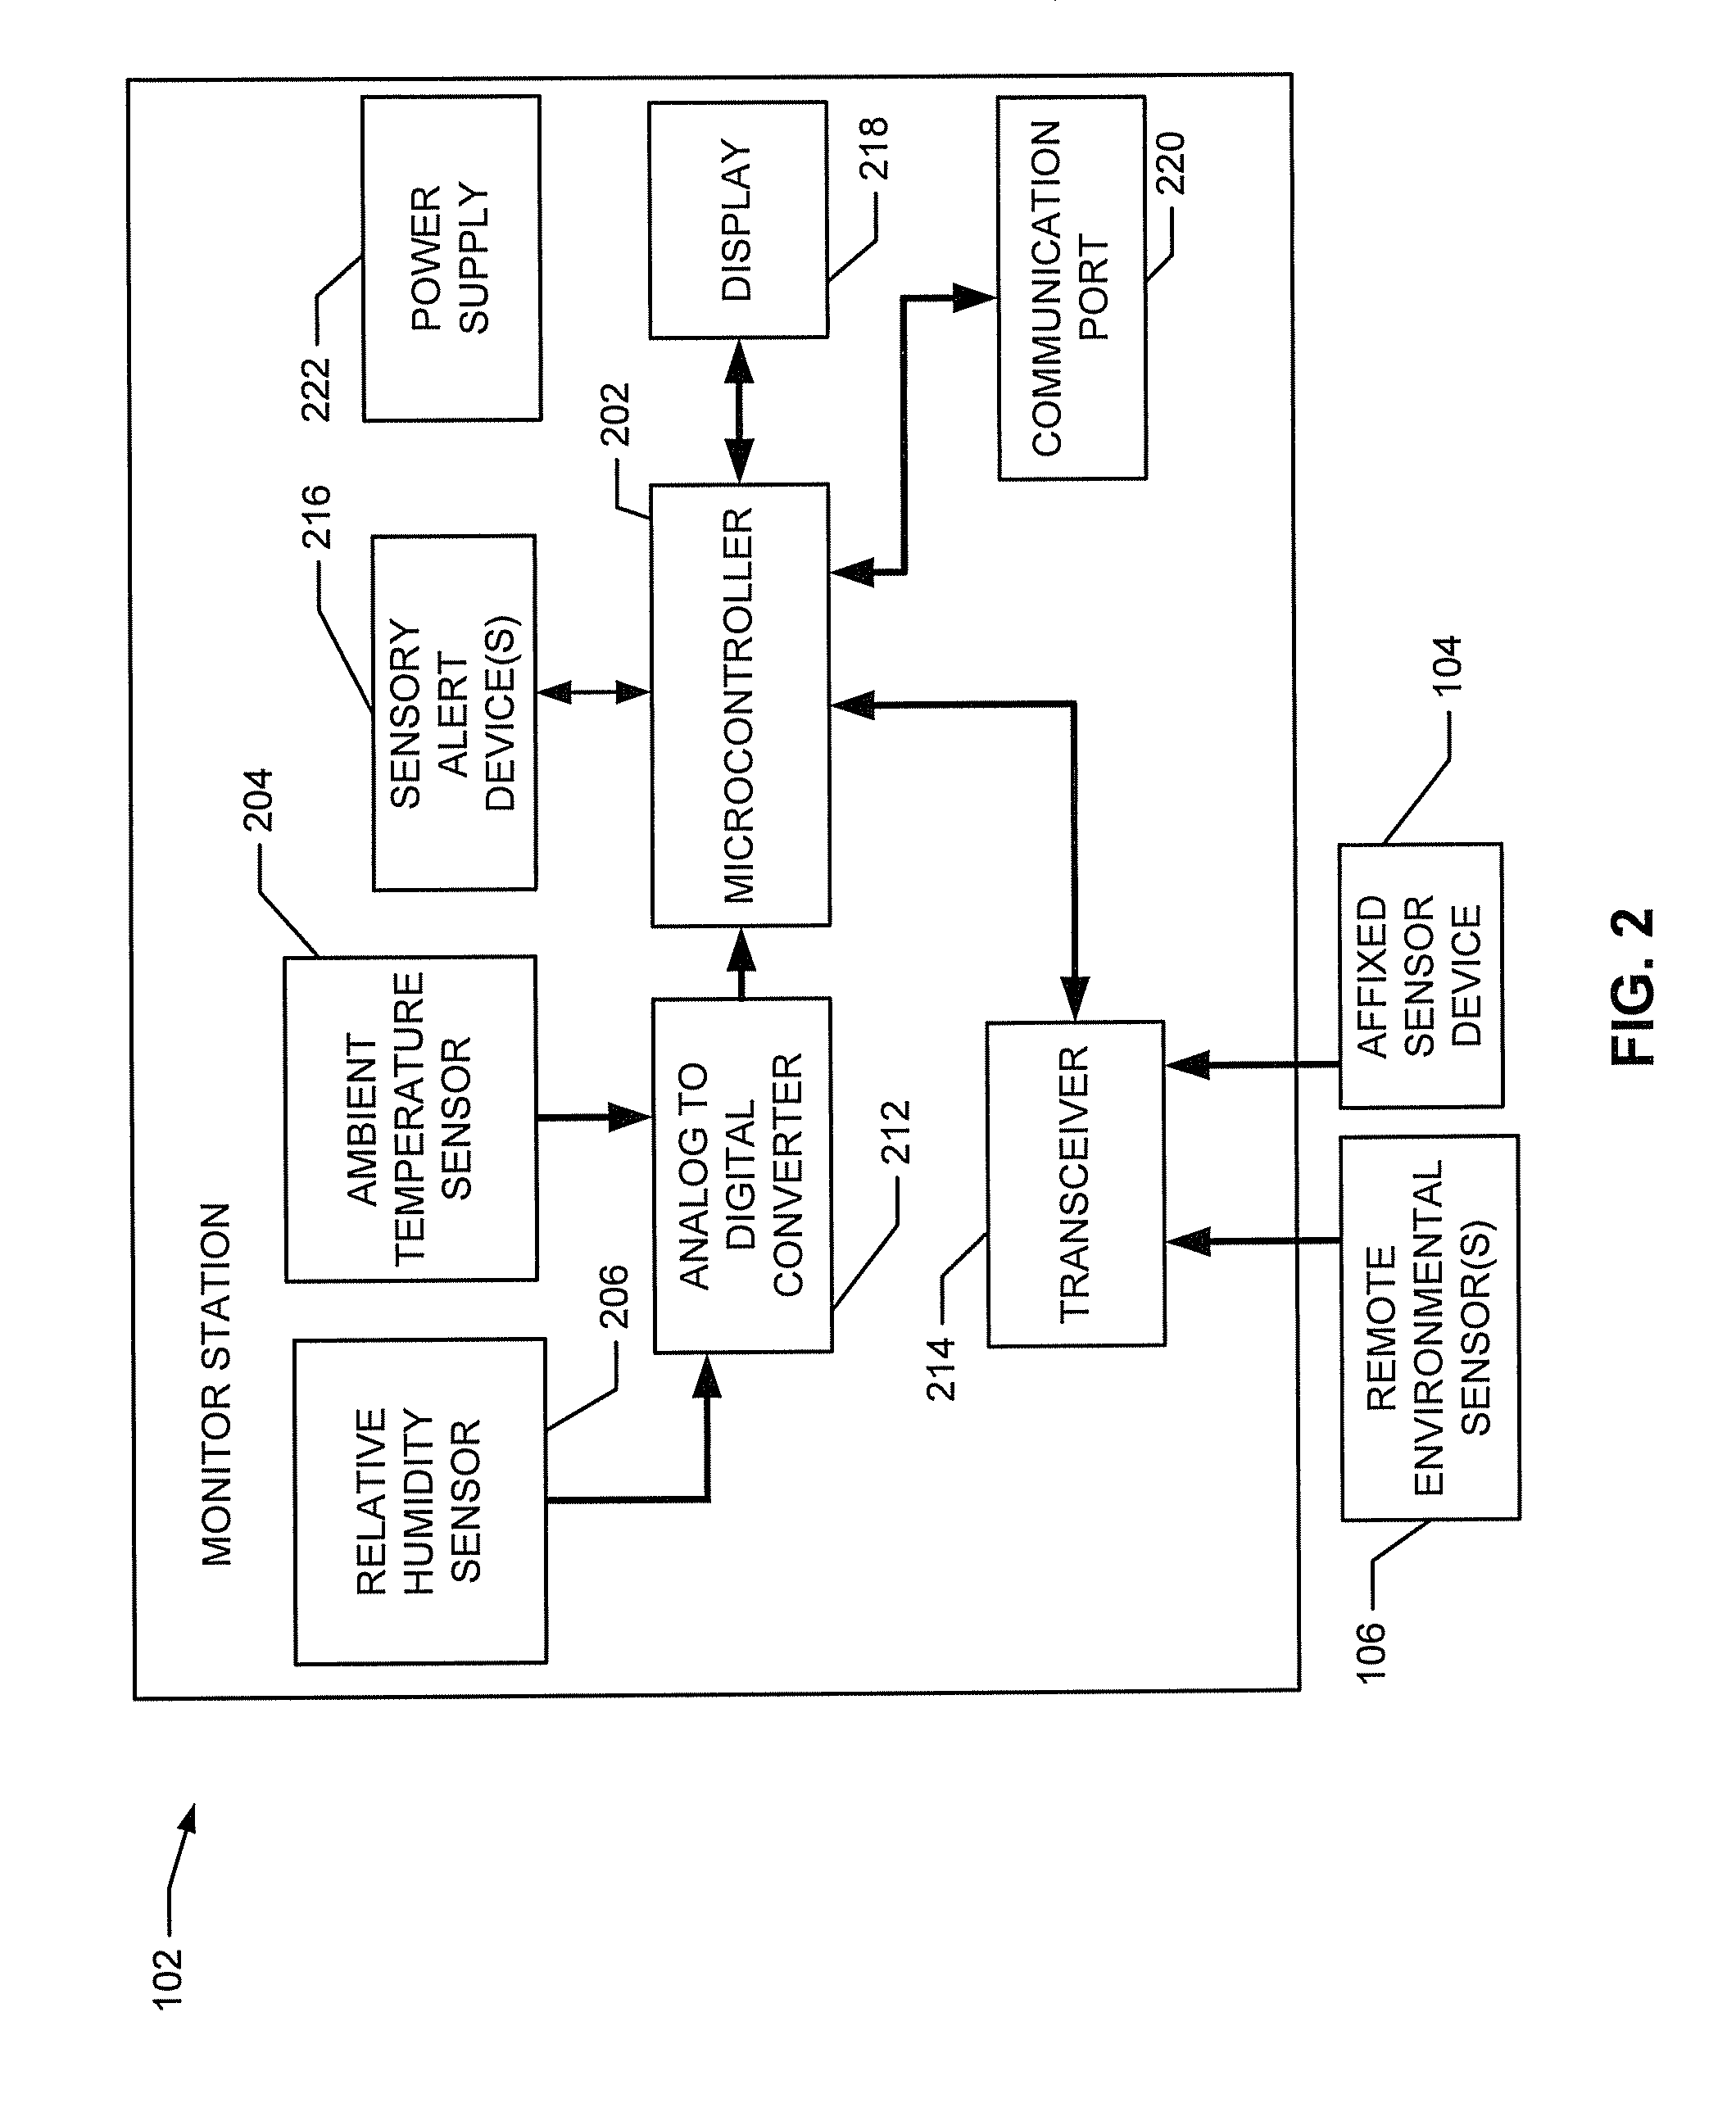 Multi-sensor environmental and physiological monitor system and methods of use